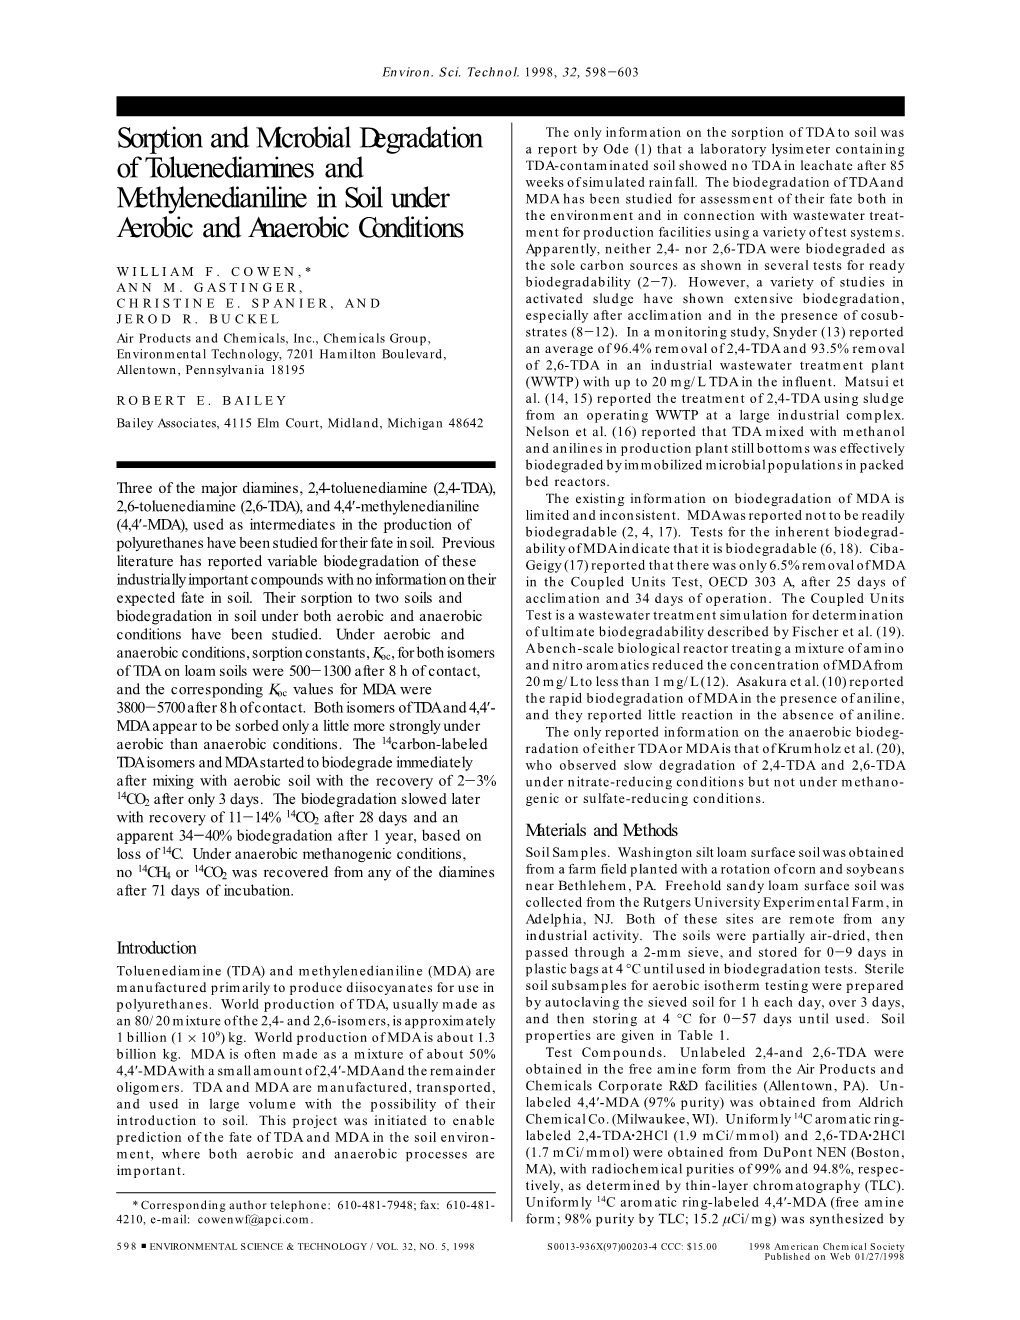 Sorption and Microbial Degradation of Toluenediamines And